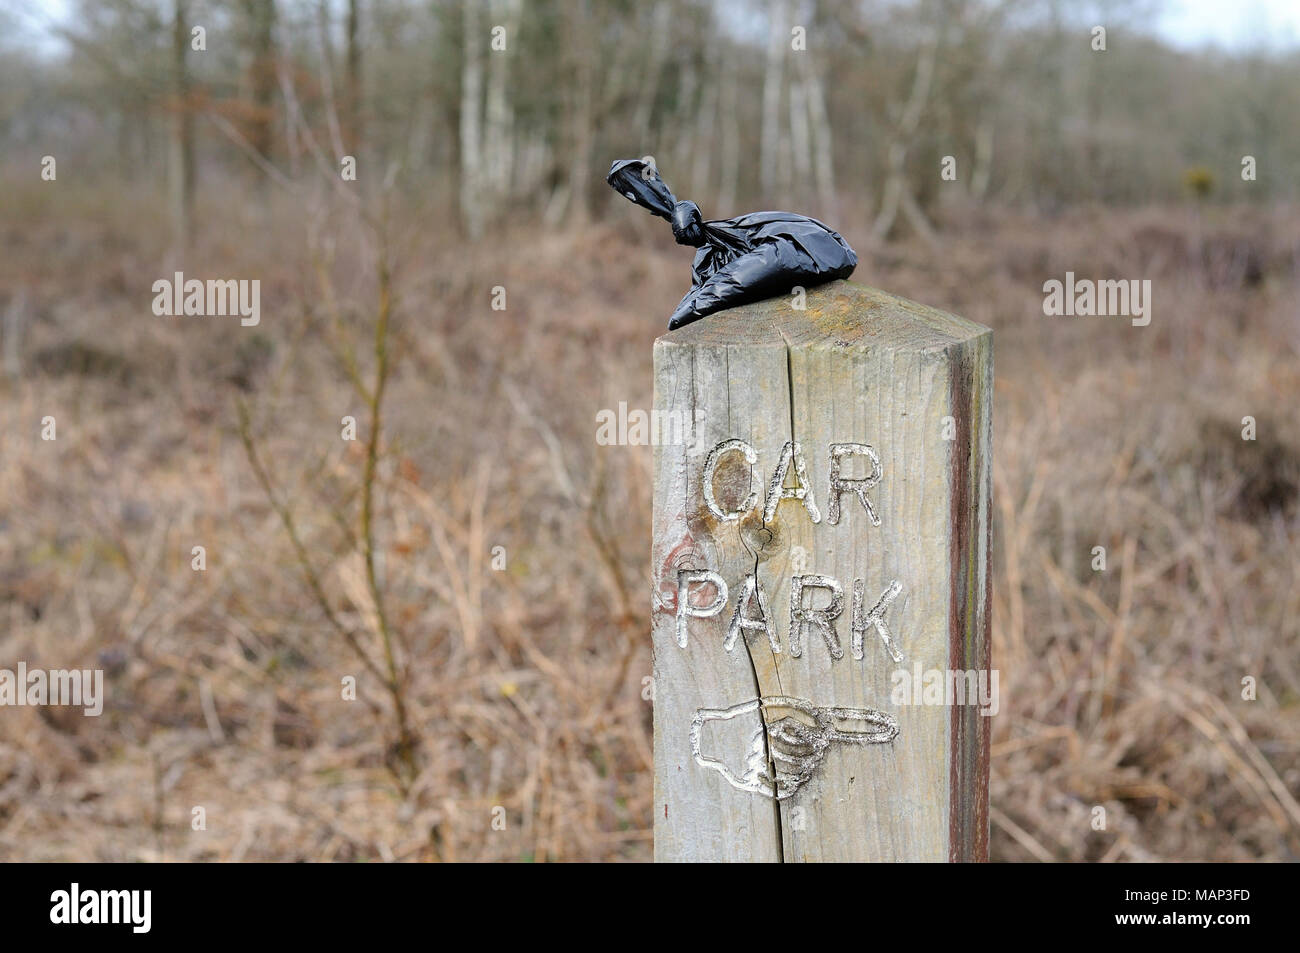 Dog poo bag left on wooden sign post Stock Photo